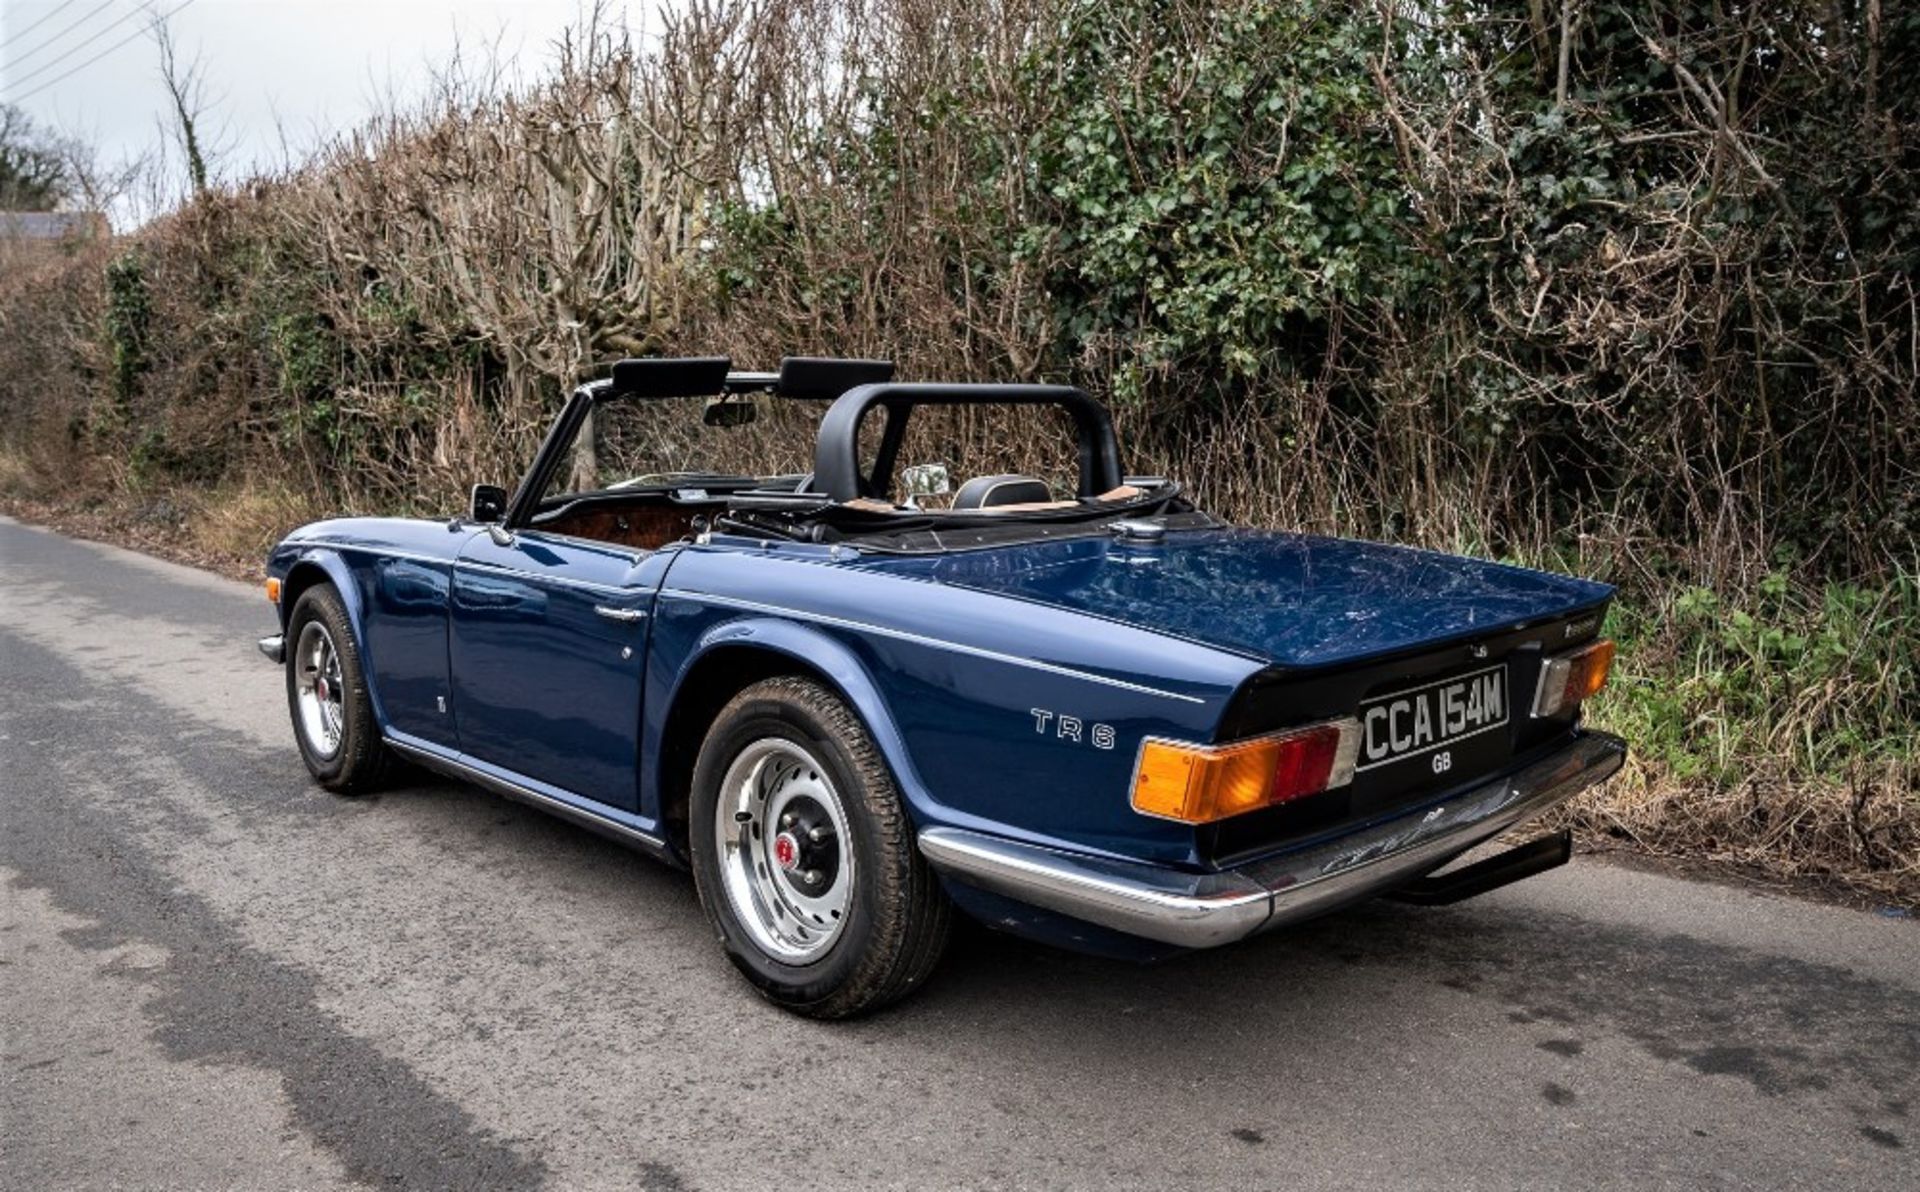 1974 TRIUMPH TR6 Registration Number: CCA 154M Chassis Number: CF21486U Recorded Mileage: c.15,000 - Image 3 of 16